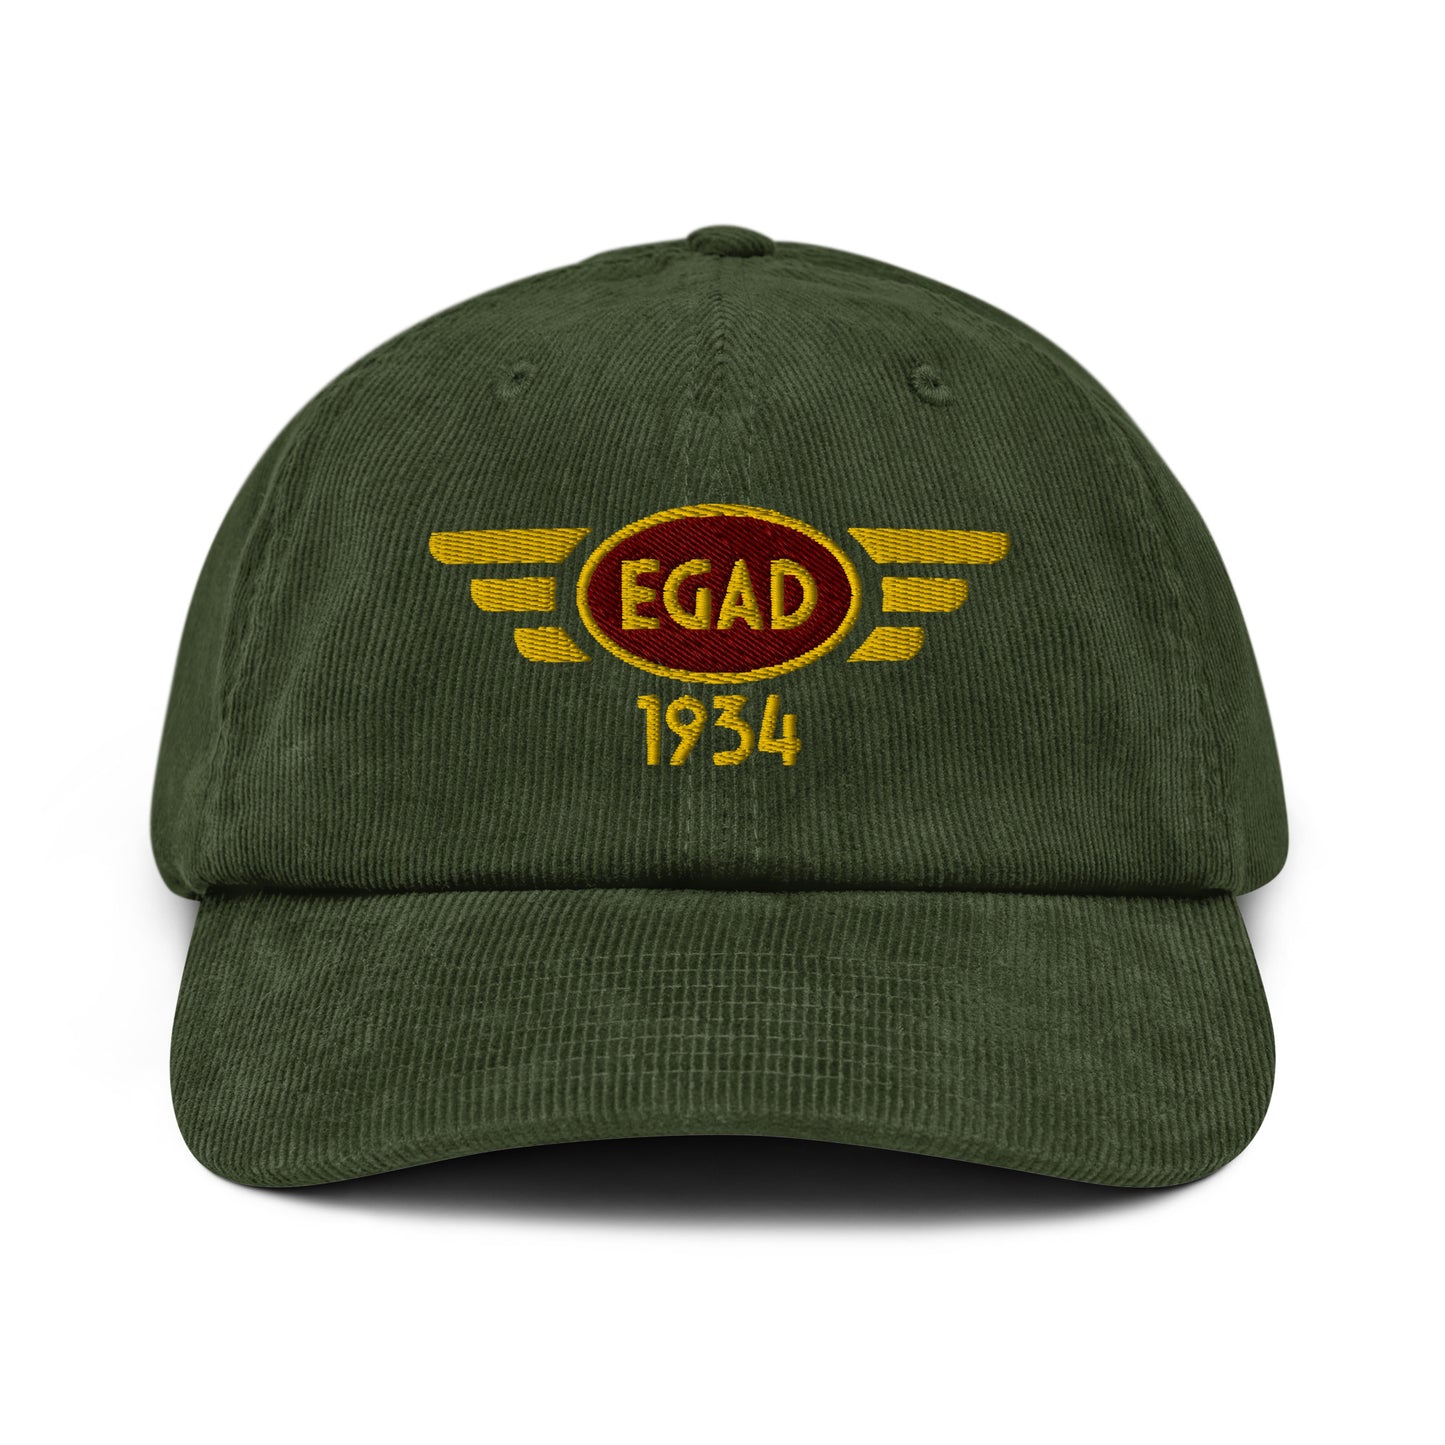 Newtownards Airport corduroy cap with embroidered ICAO code.